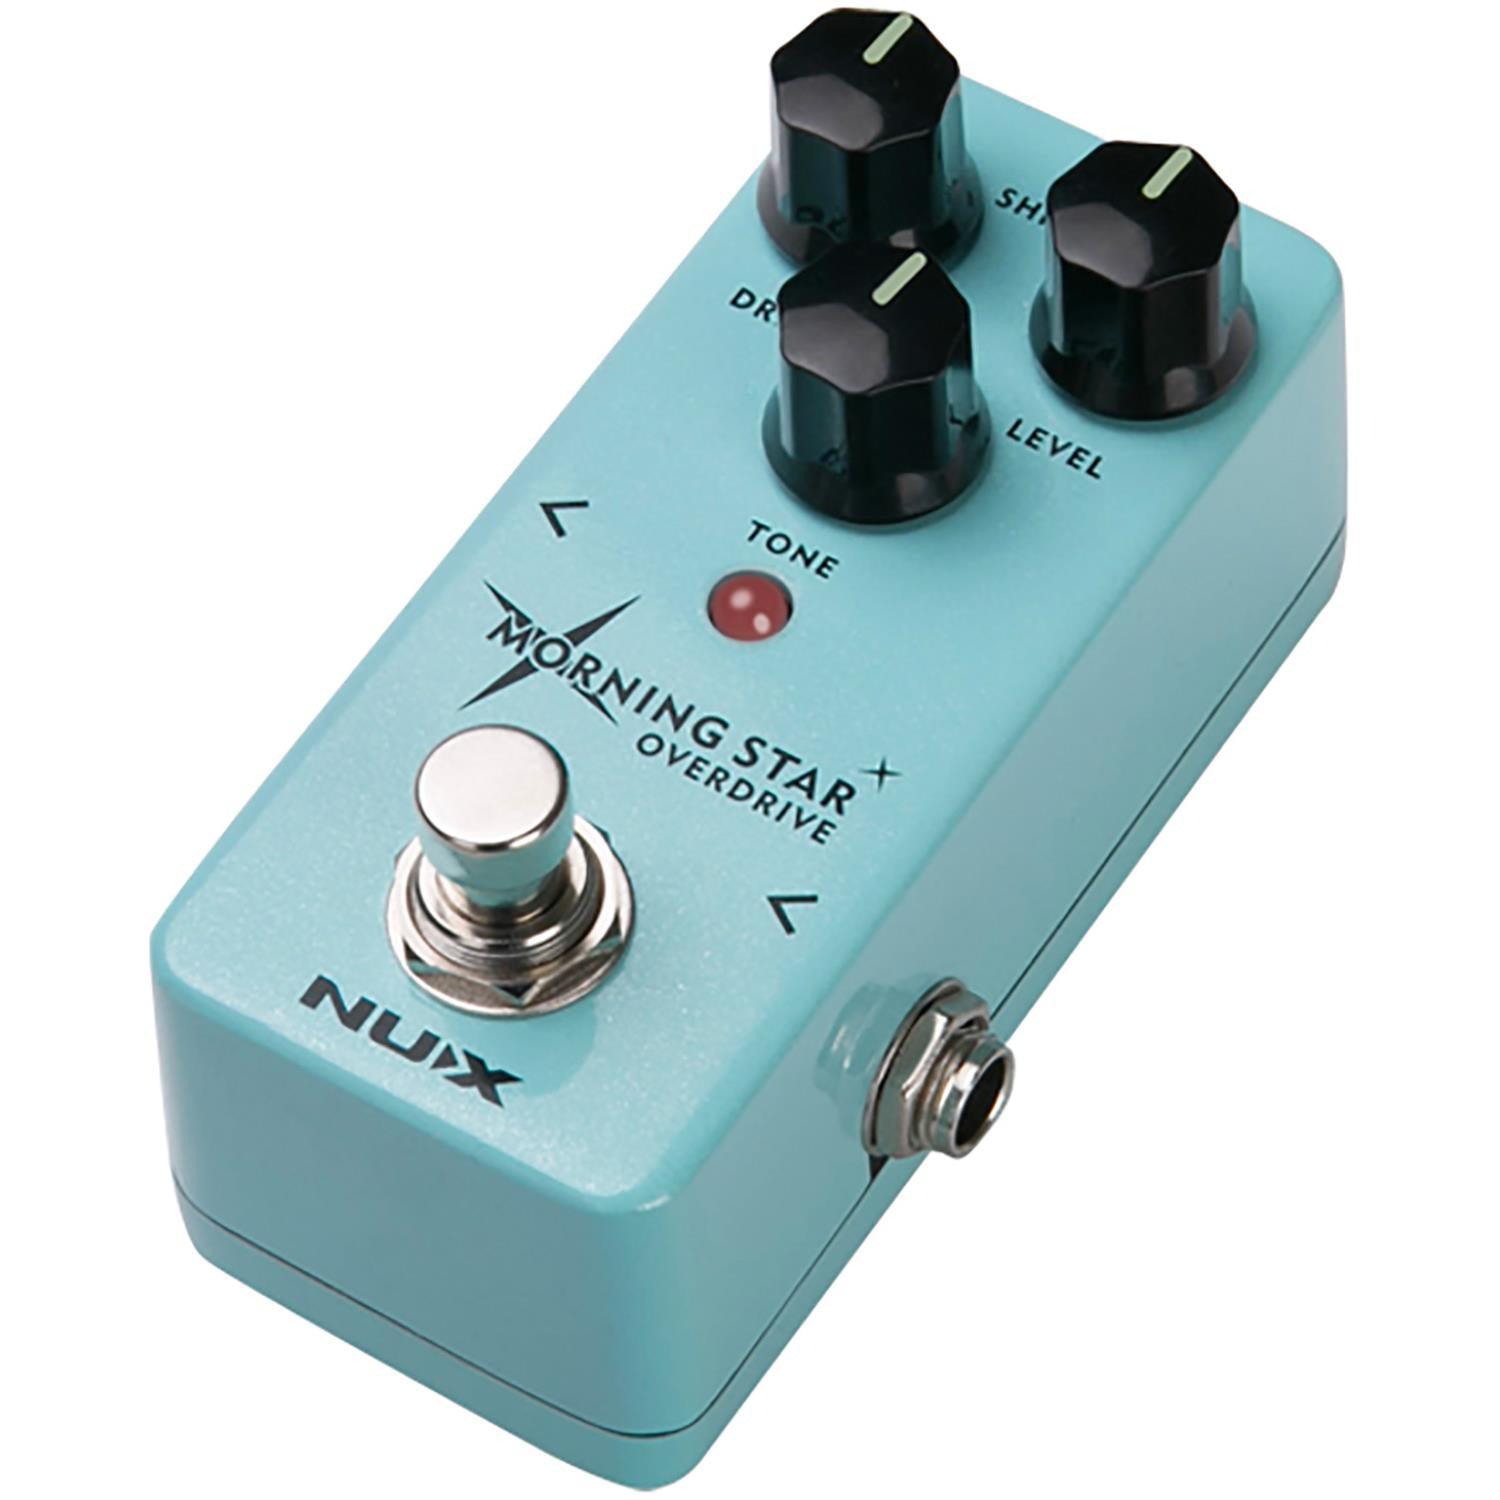 NUX Morning Star Overdrive Pedal - DY Pro Audio